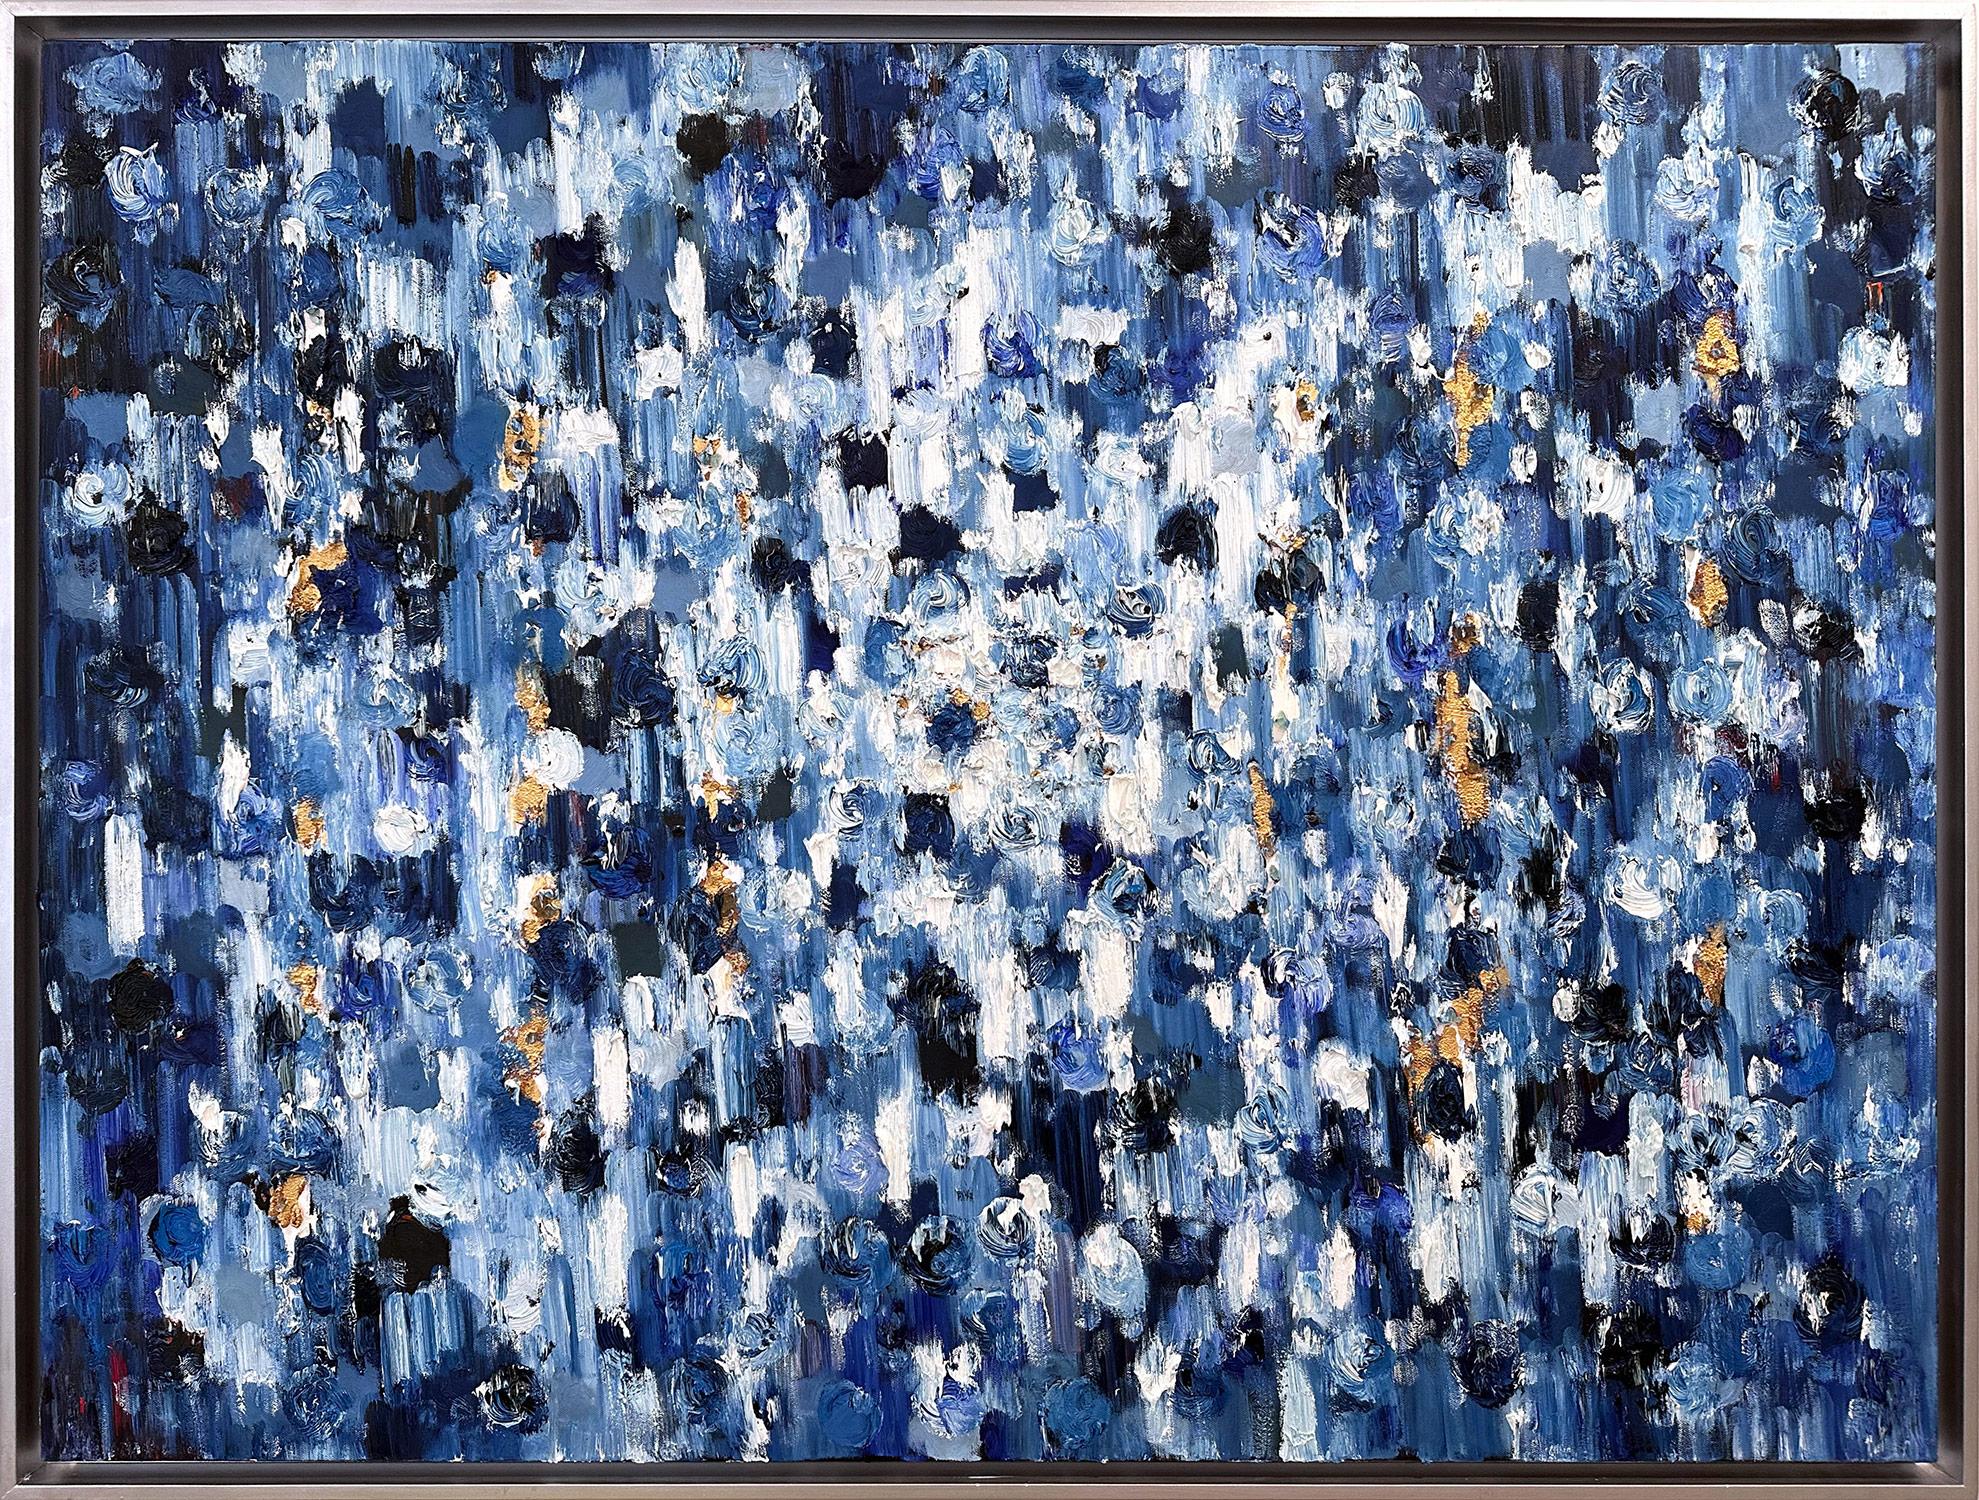 Cindy Shaoul Abstract Painting - "Dripping Dots - Knightsbridge" Blue Abstract Oil Painting on Canvas with Gold